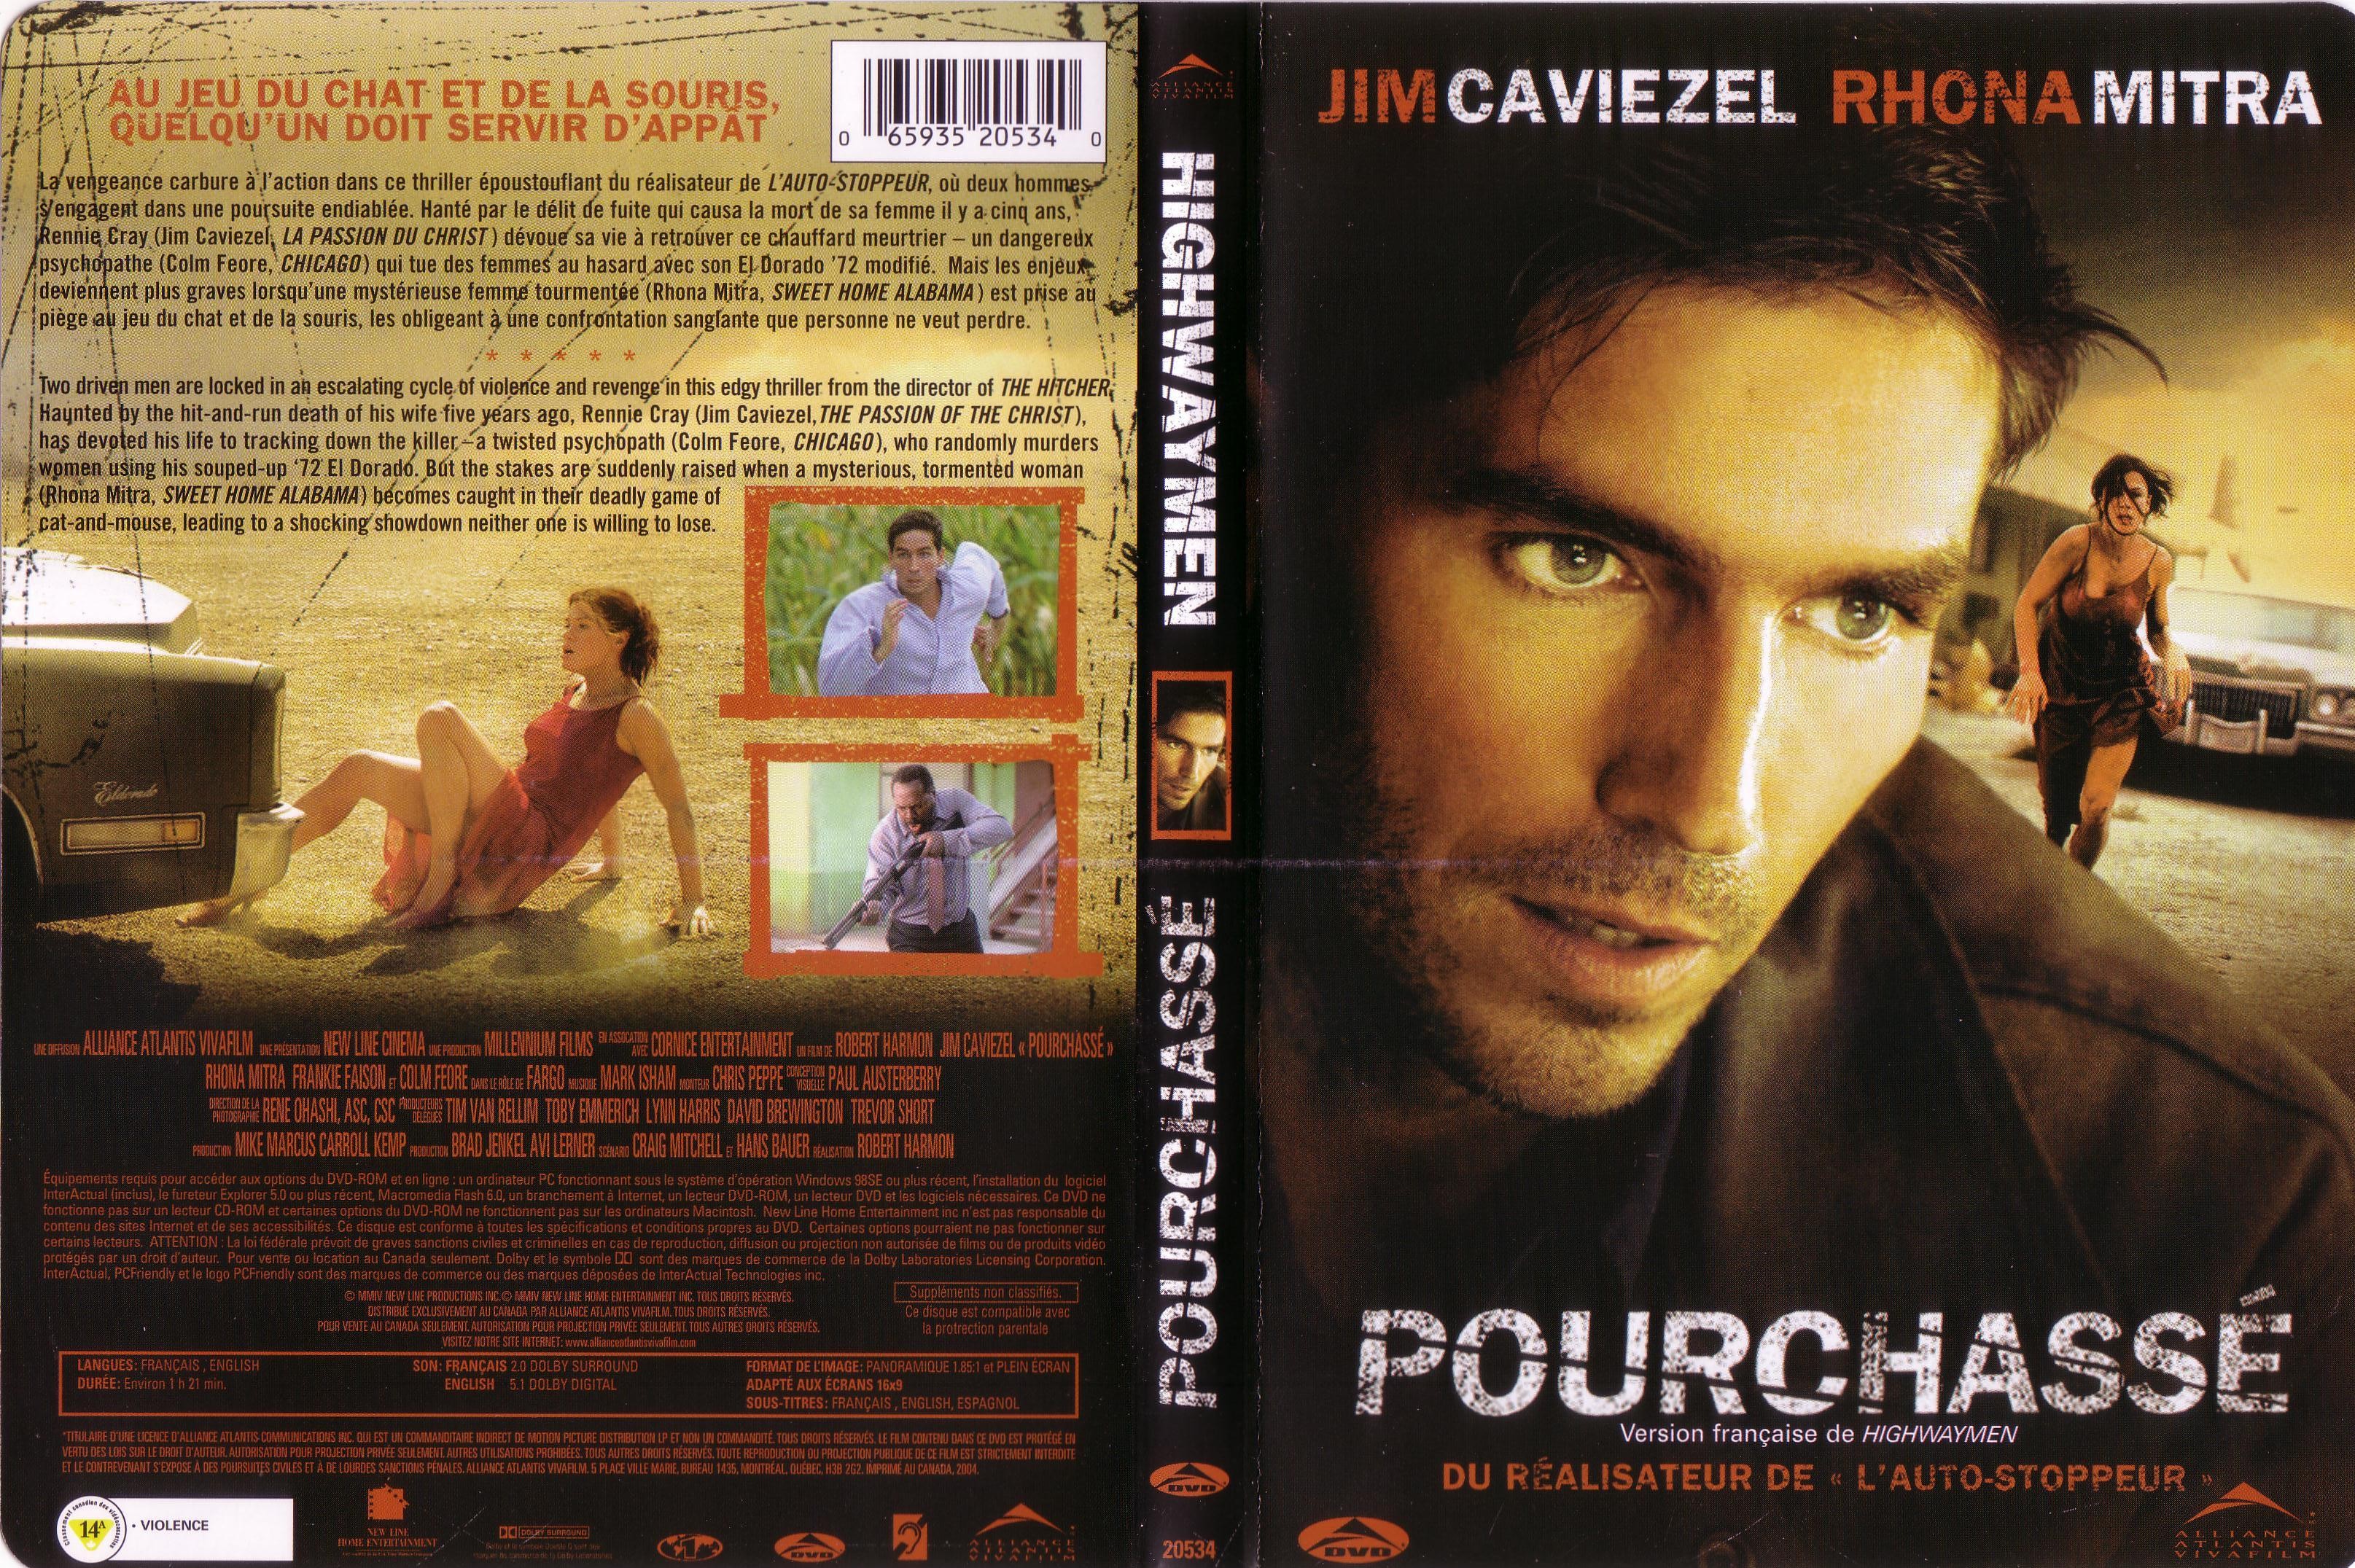 Jaquette DVD Pourchass